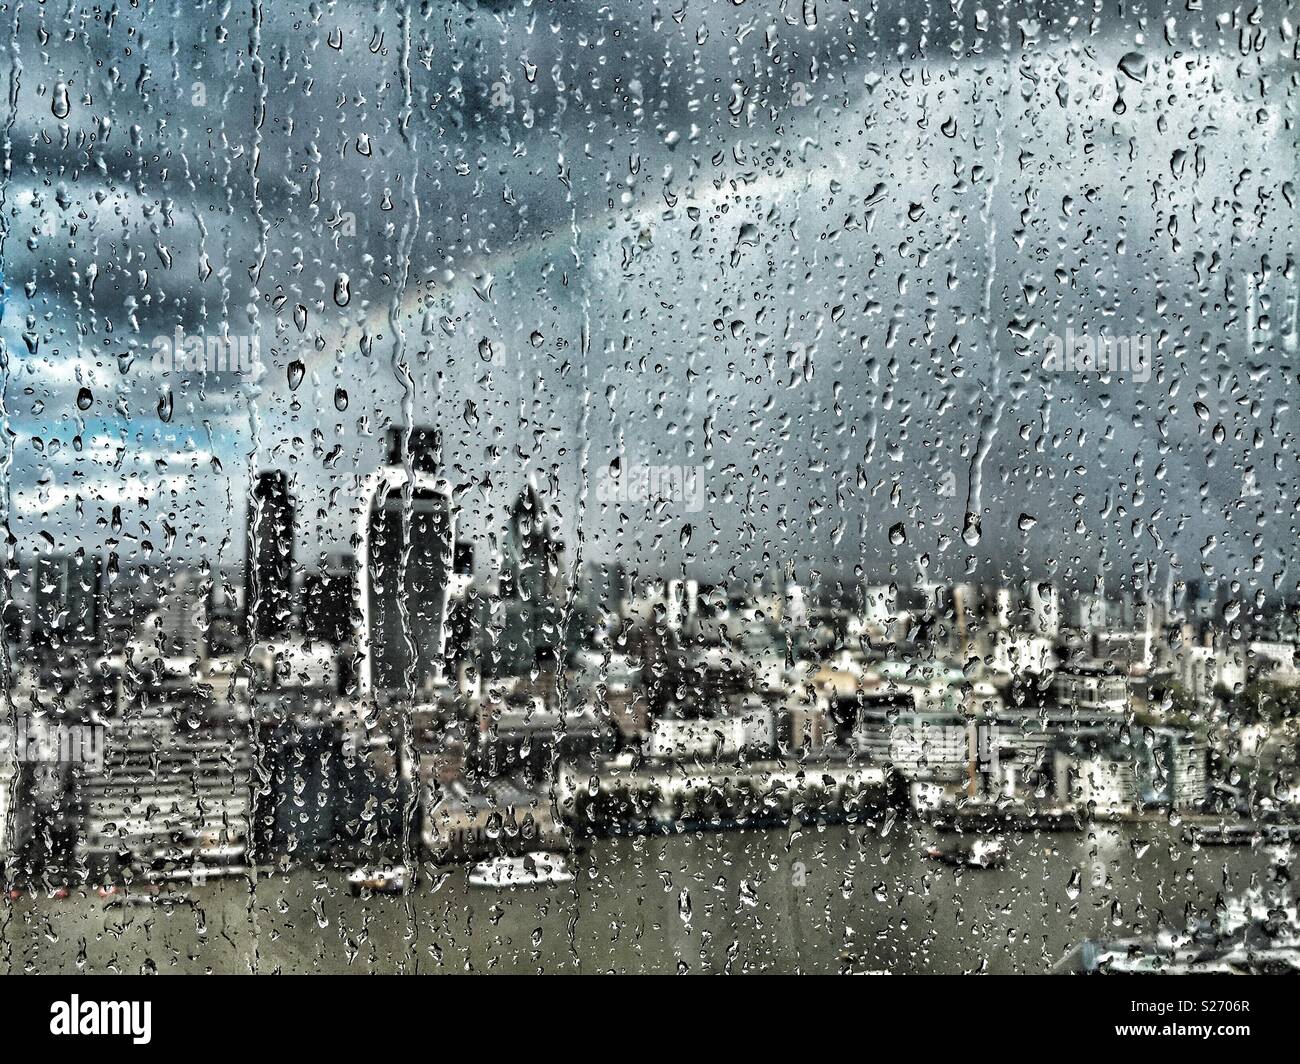 Rain on the window of The Shard, London, UK, looking across the Thames towards Fenchurch Street and over the City. A rainbow lights up the sky as the sun breaks through, lighting up the city below. Stock Photo